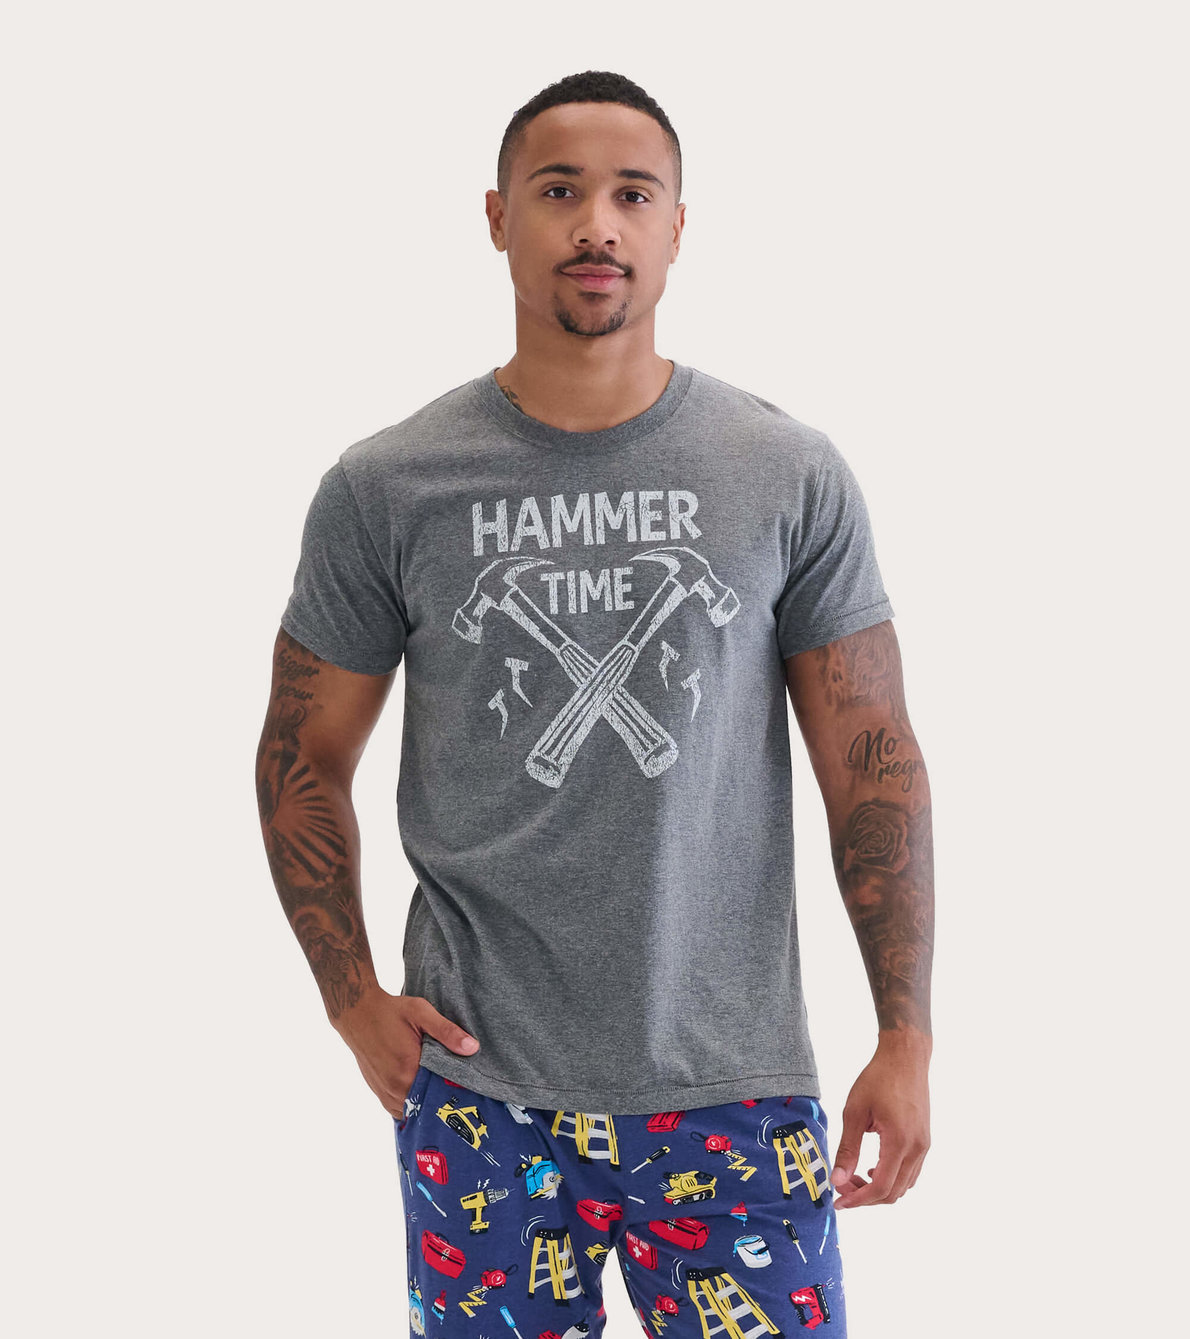 View larger image of Hammer Time Men's Tee